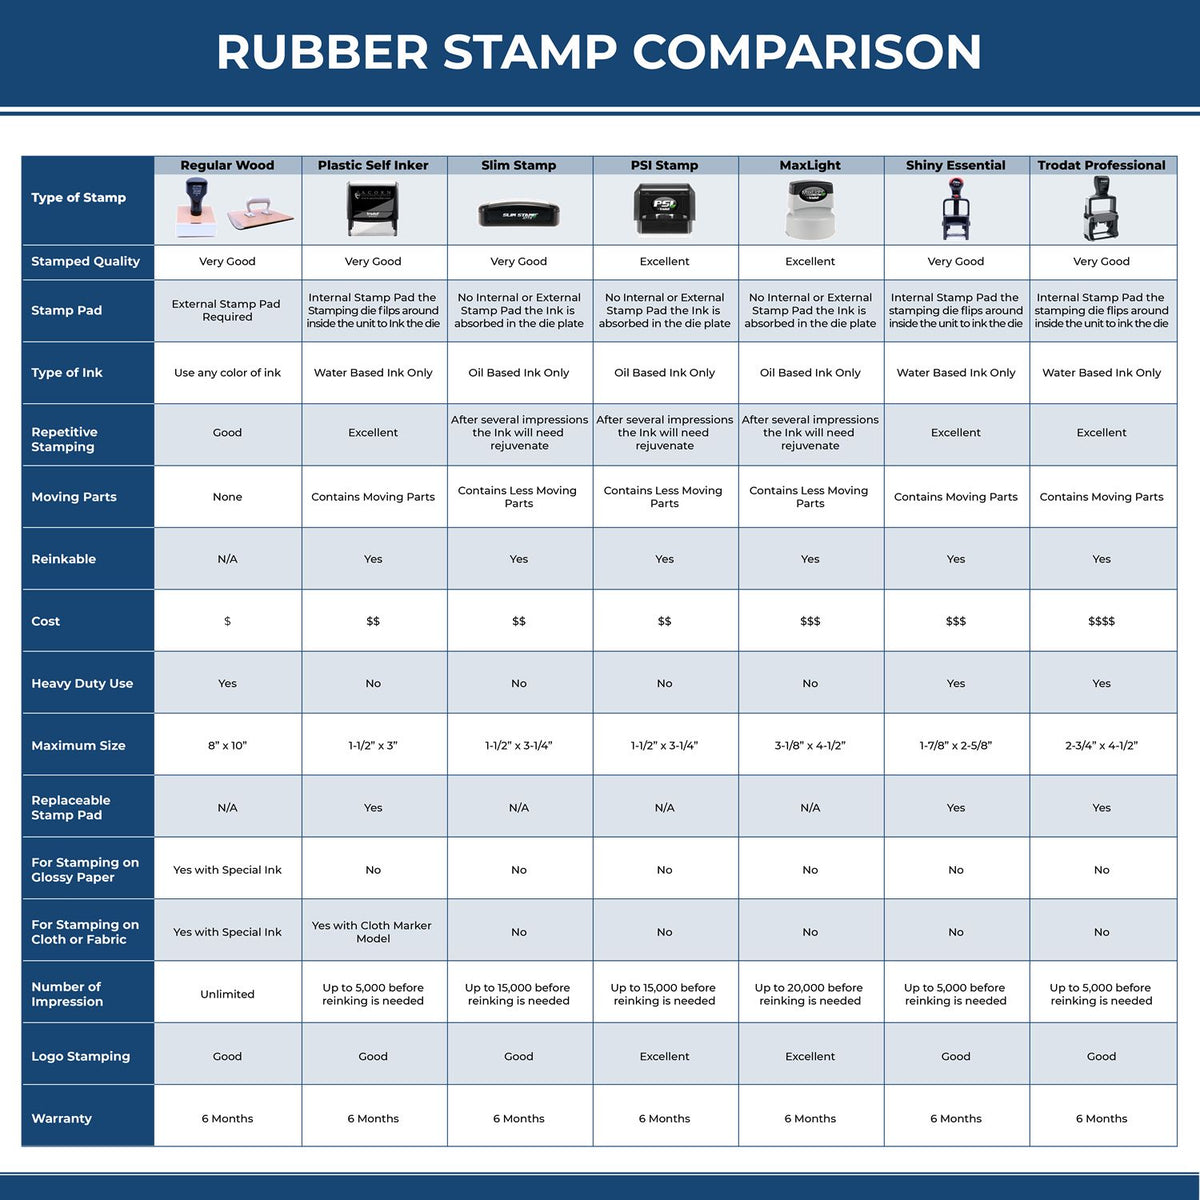 Large Ira Rubber Stamp 4562R Rubber Stamp Comparison